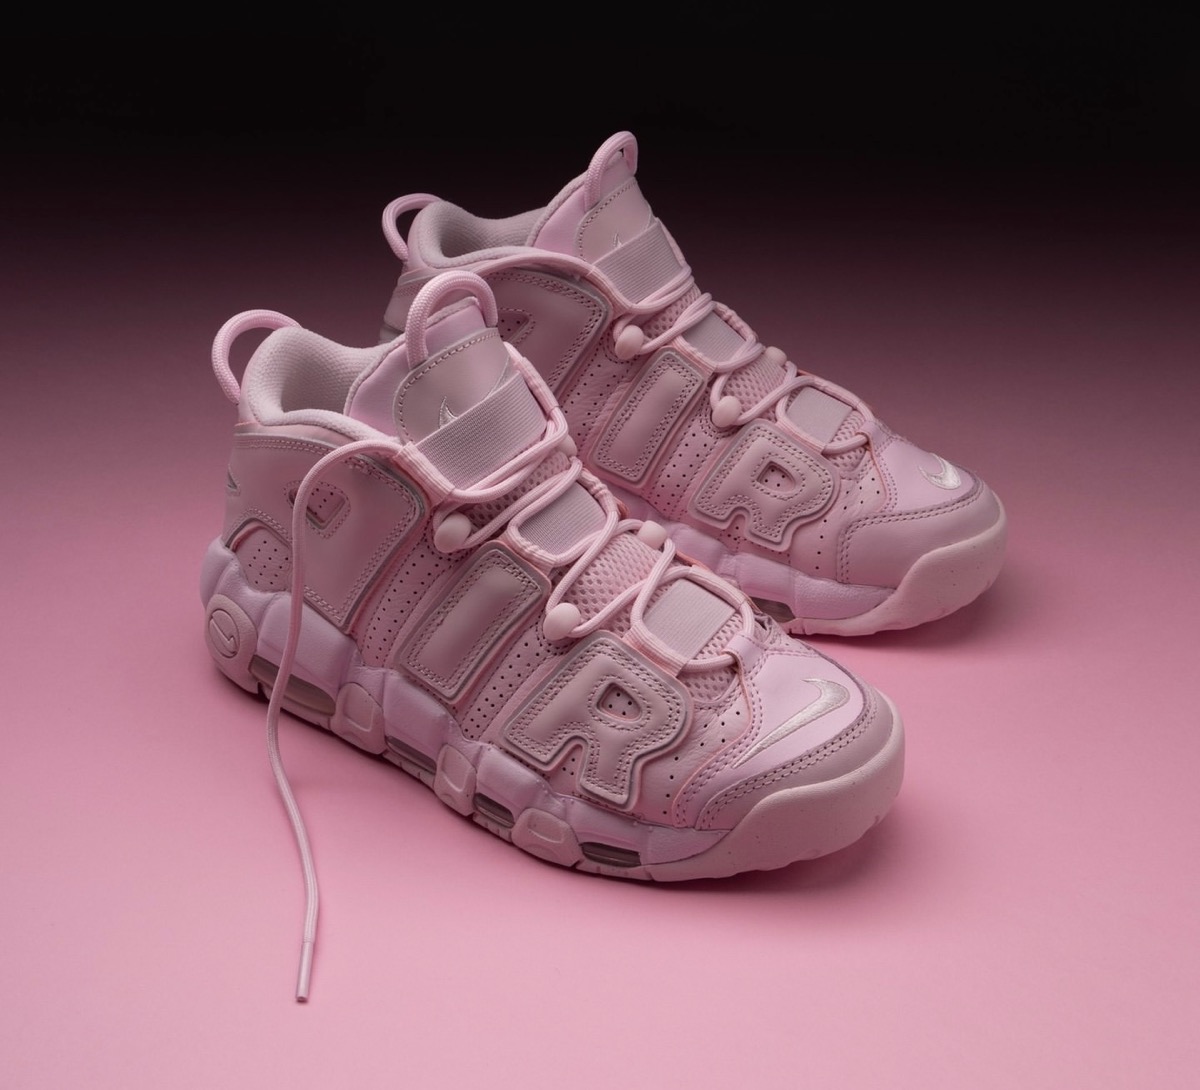 pinkNIKE AIR MORE UPTEMPO PINK FOAM  28.5cm